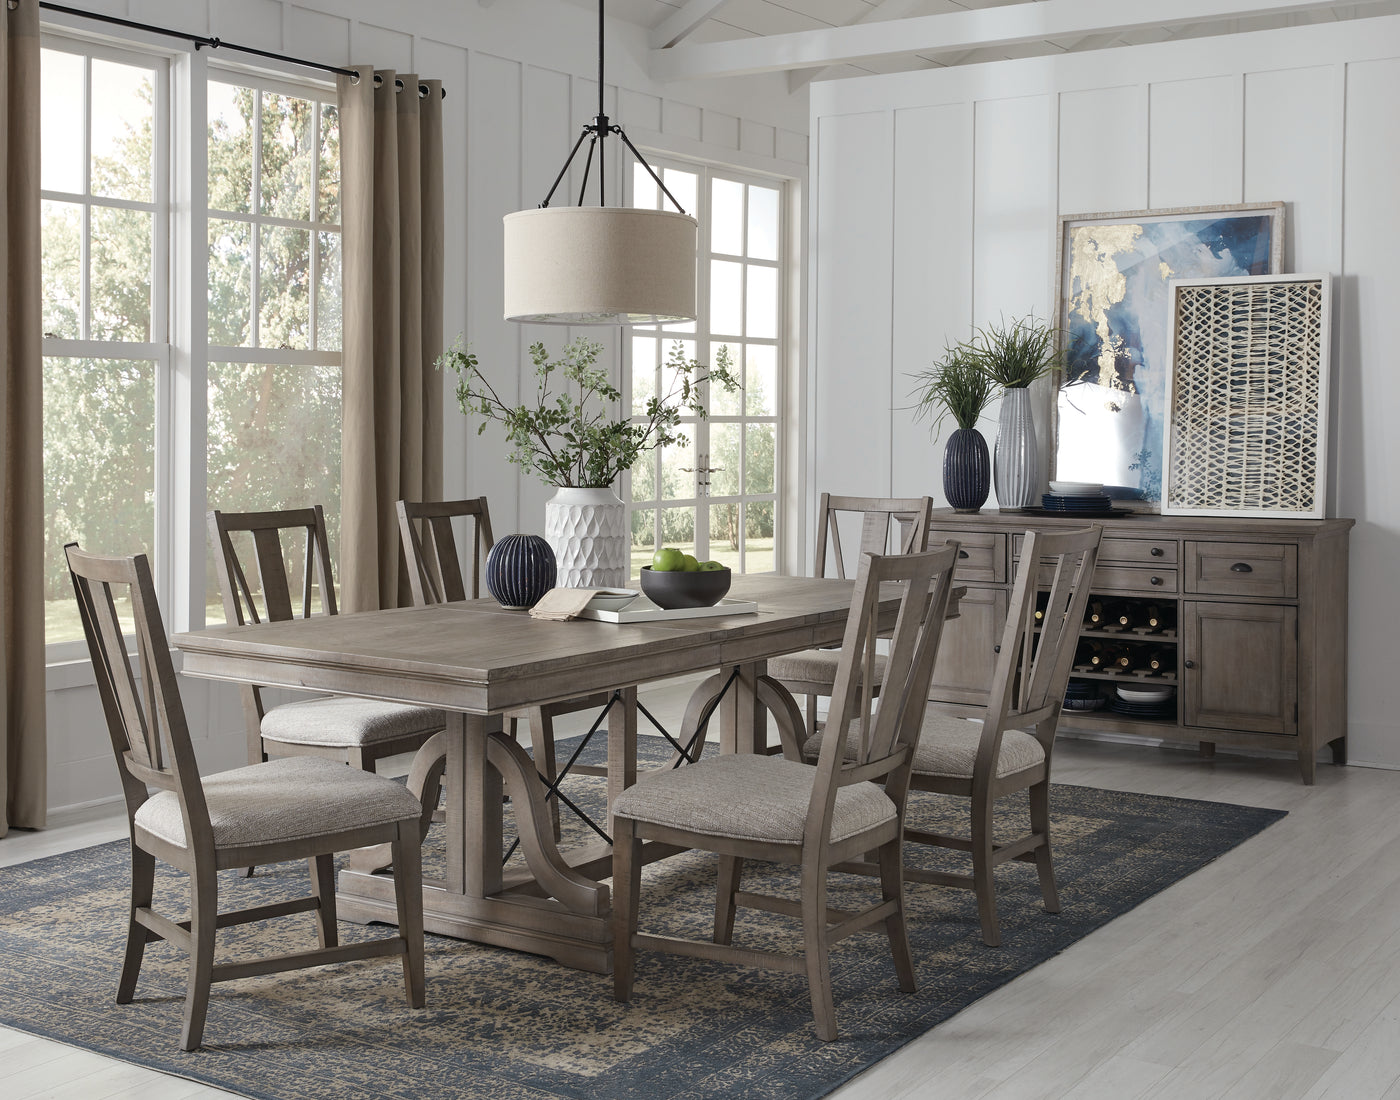 Paxton Place 7-Piece Extendable Dining Set - Greyish Brown